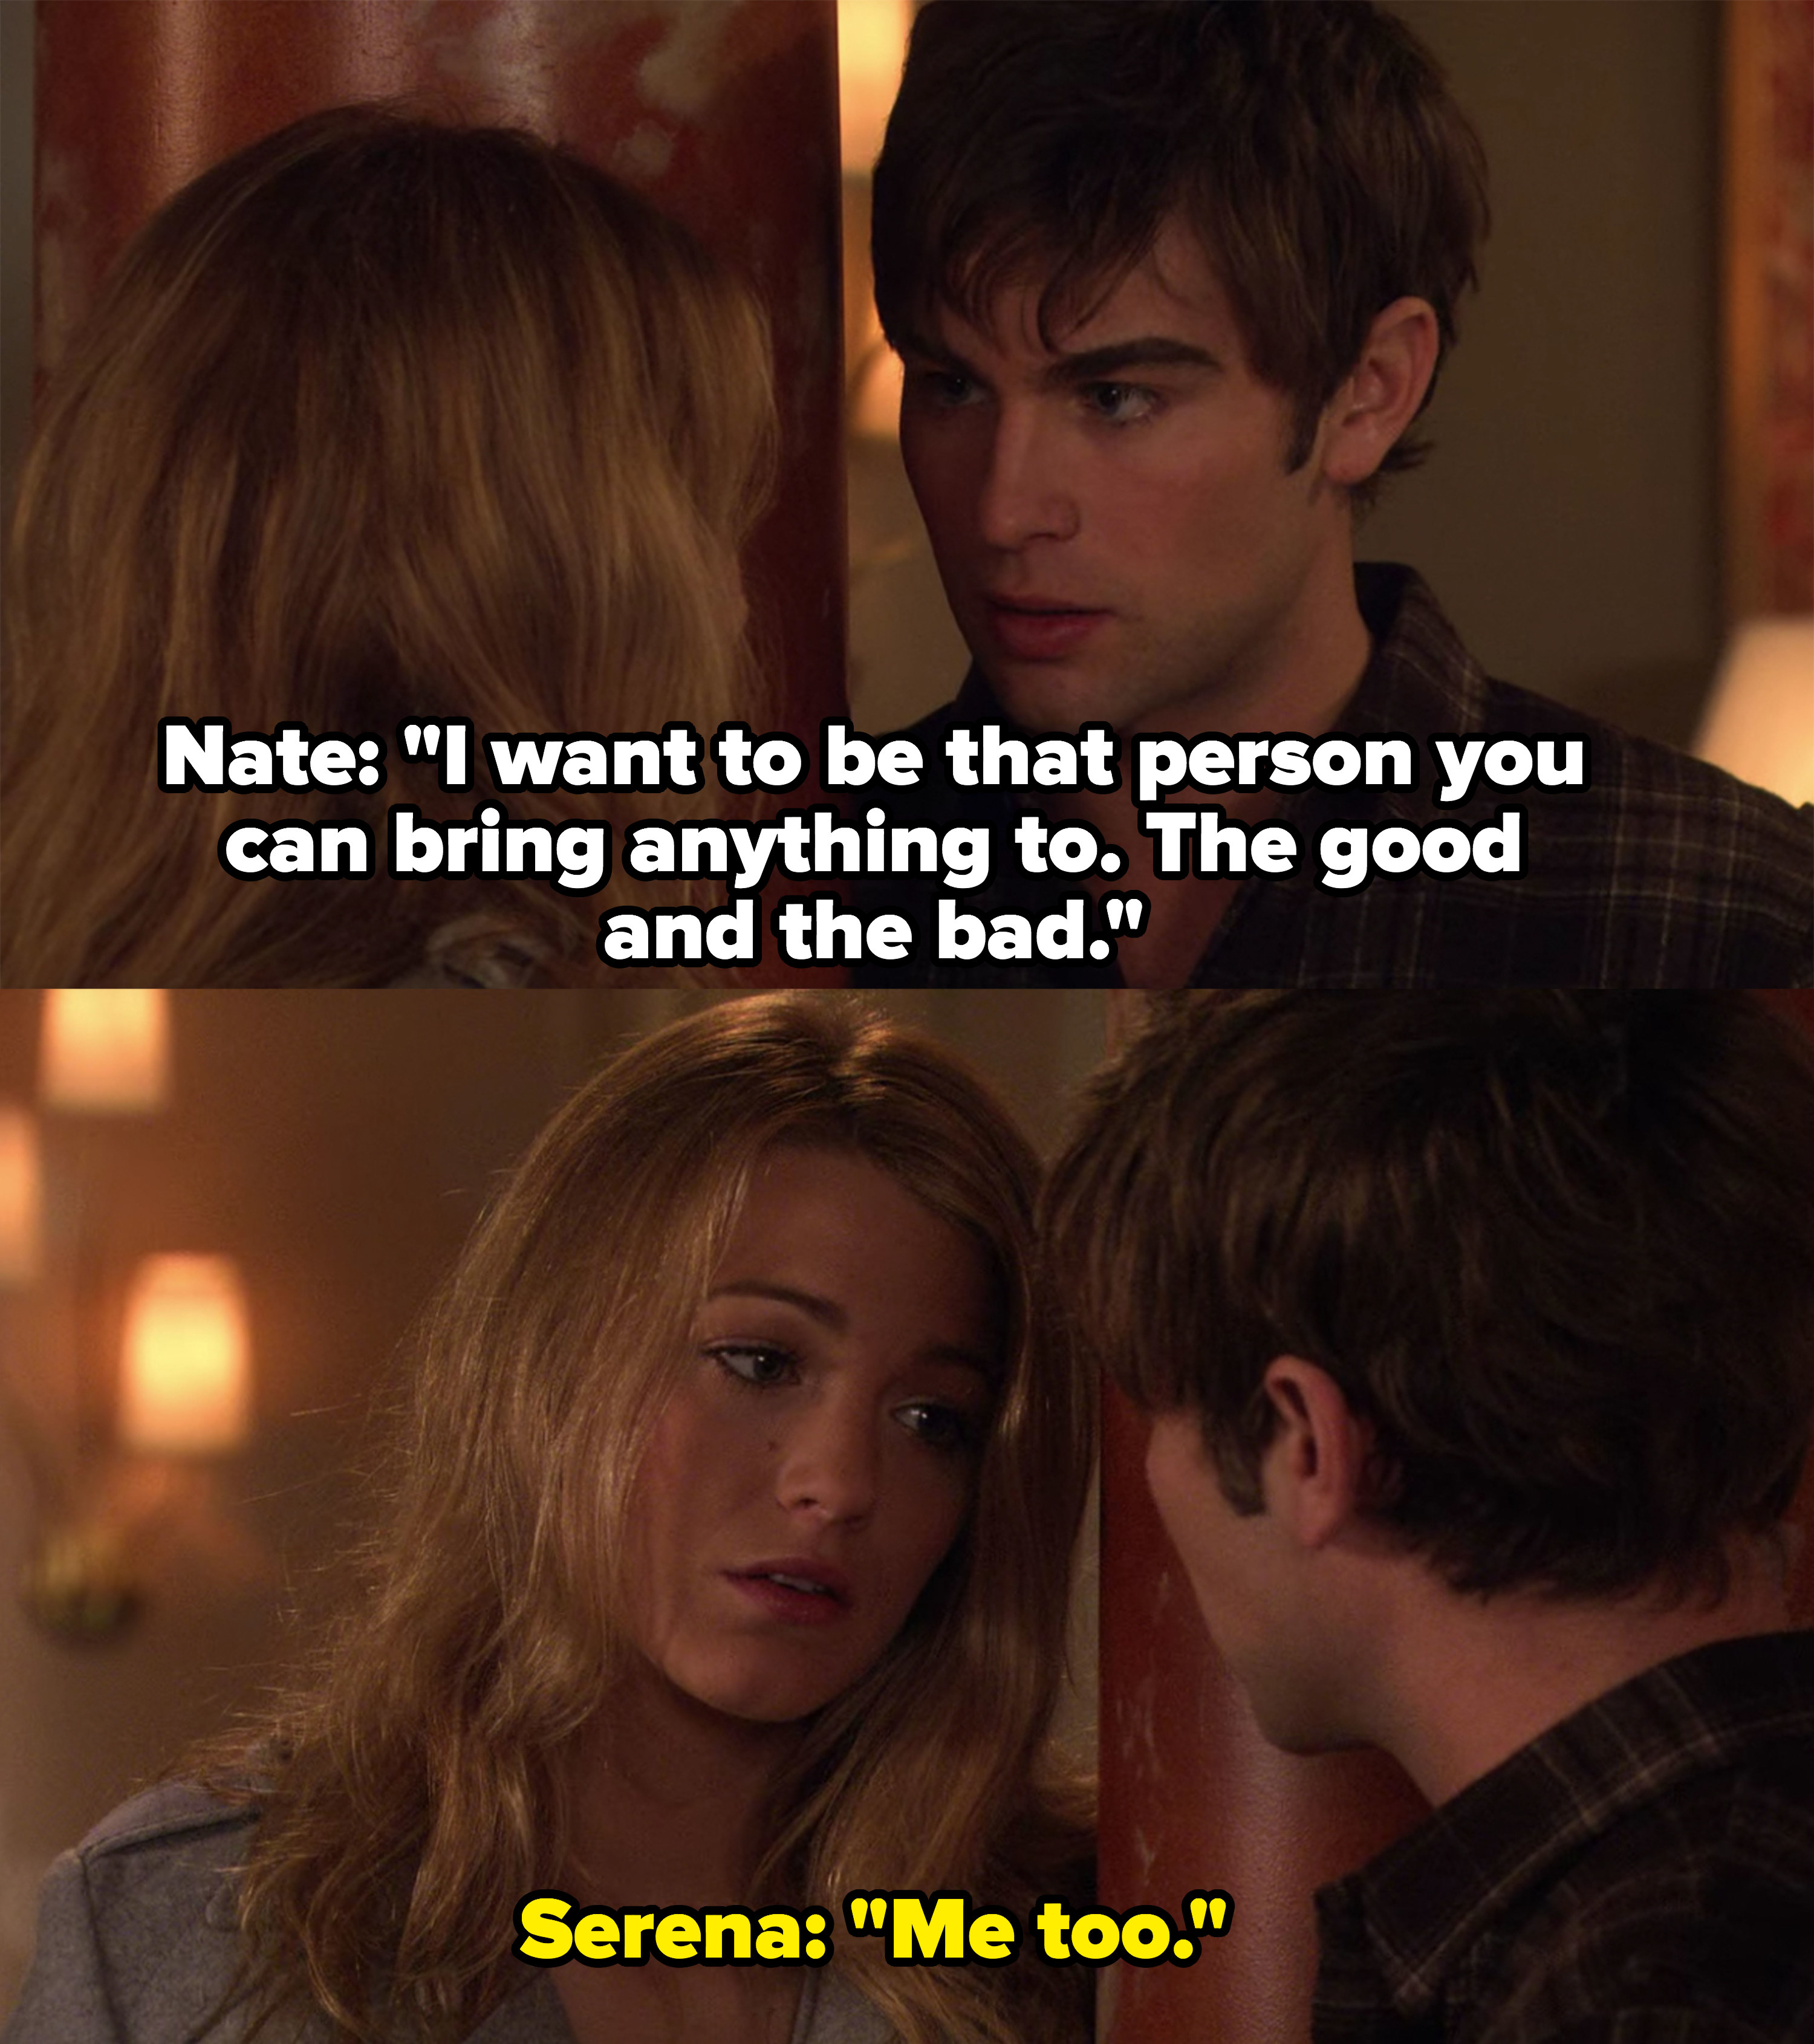 Nate: &quot;I want to be that person you can bring anything to, the good and the bad,&quot; Serena: &quot;Me too&quot;